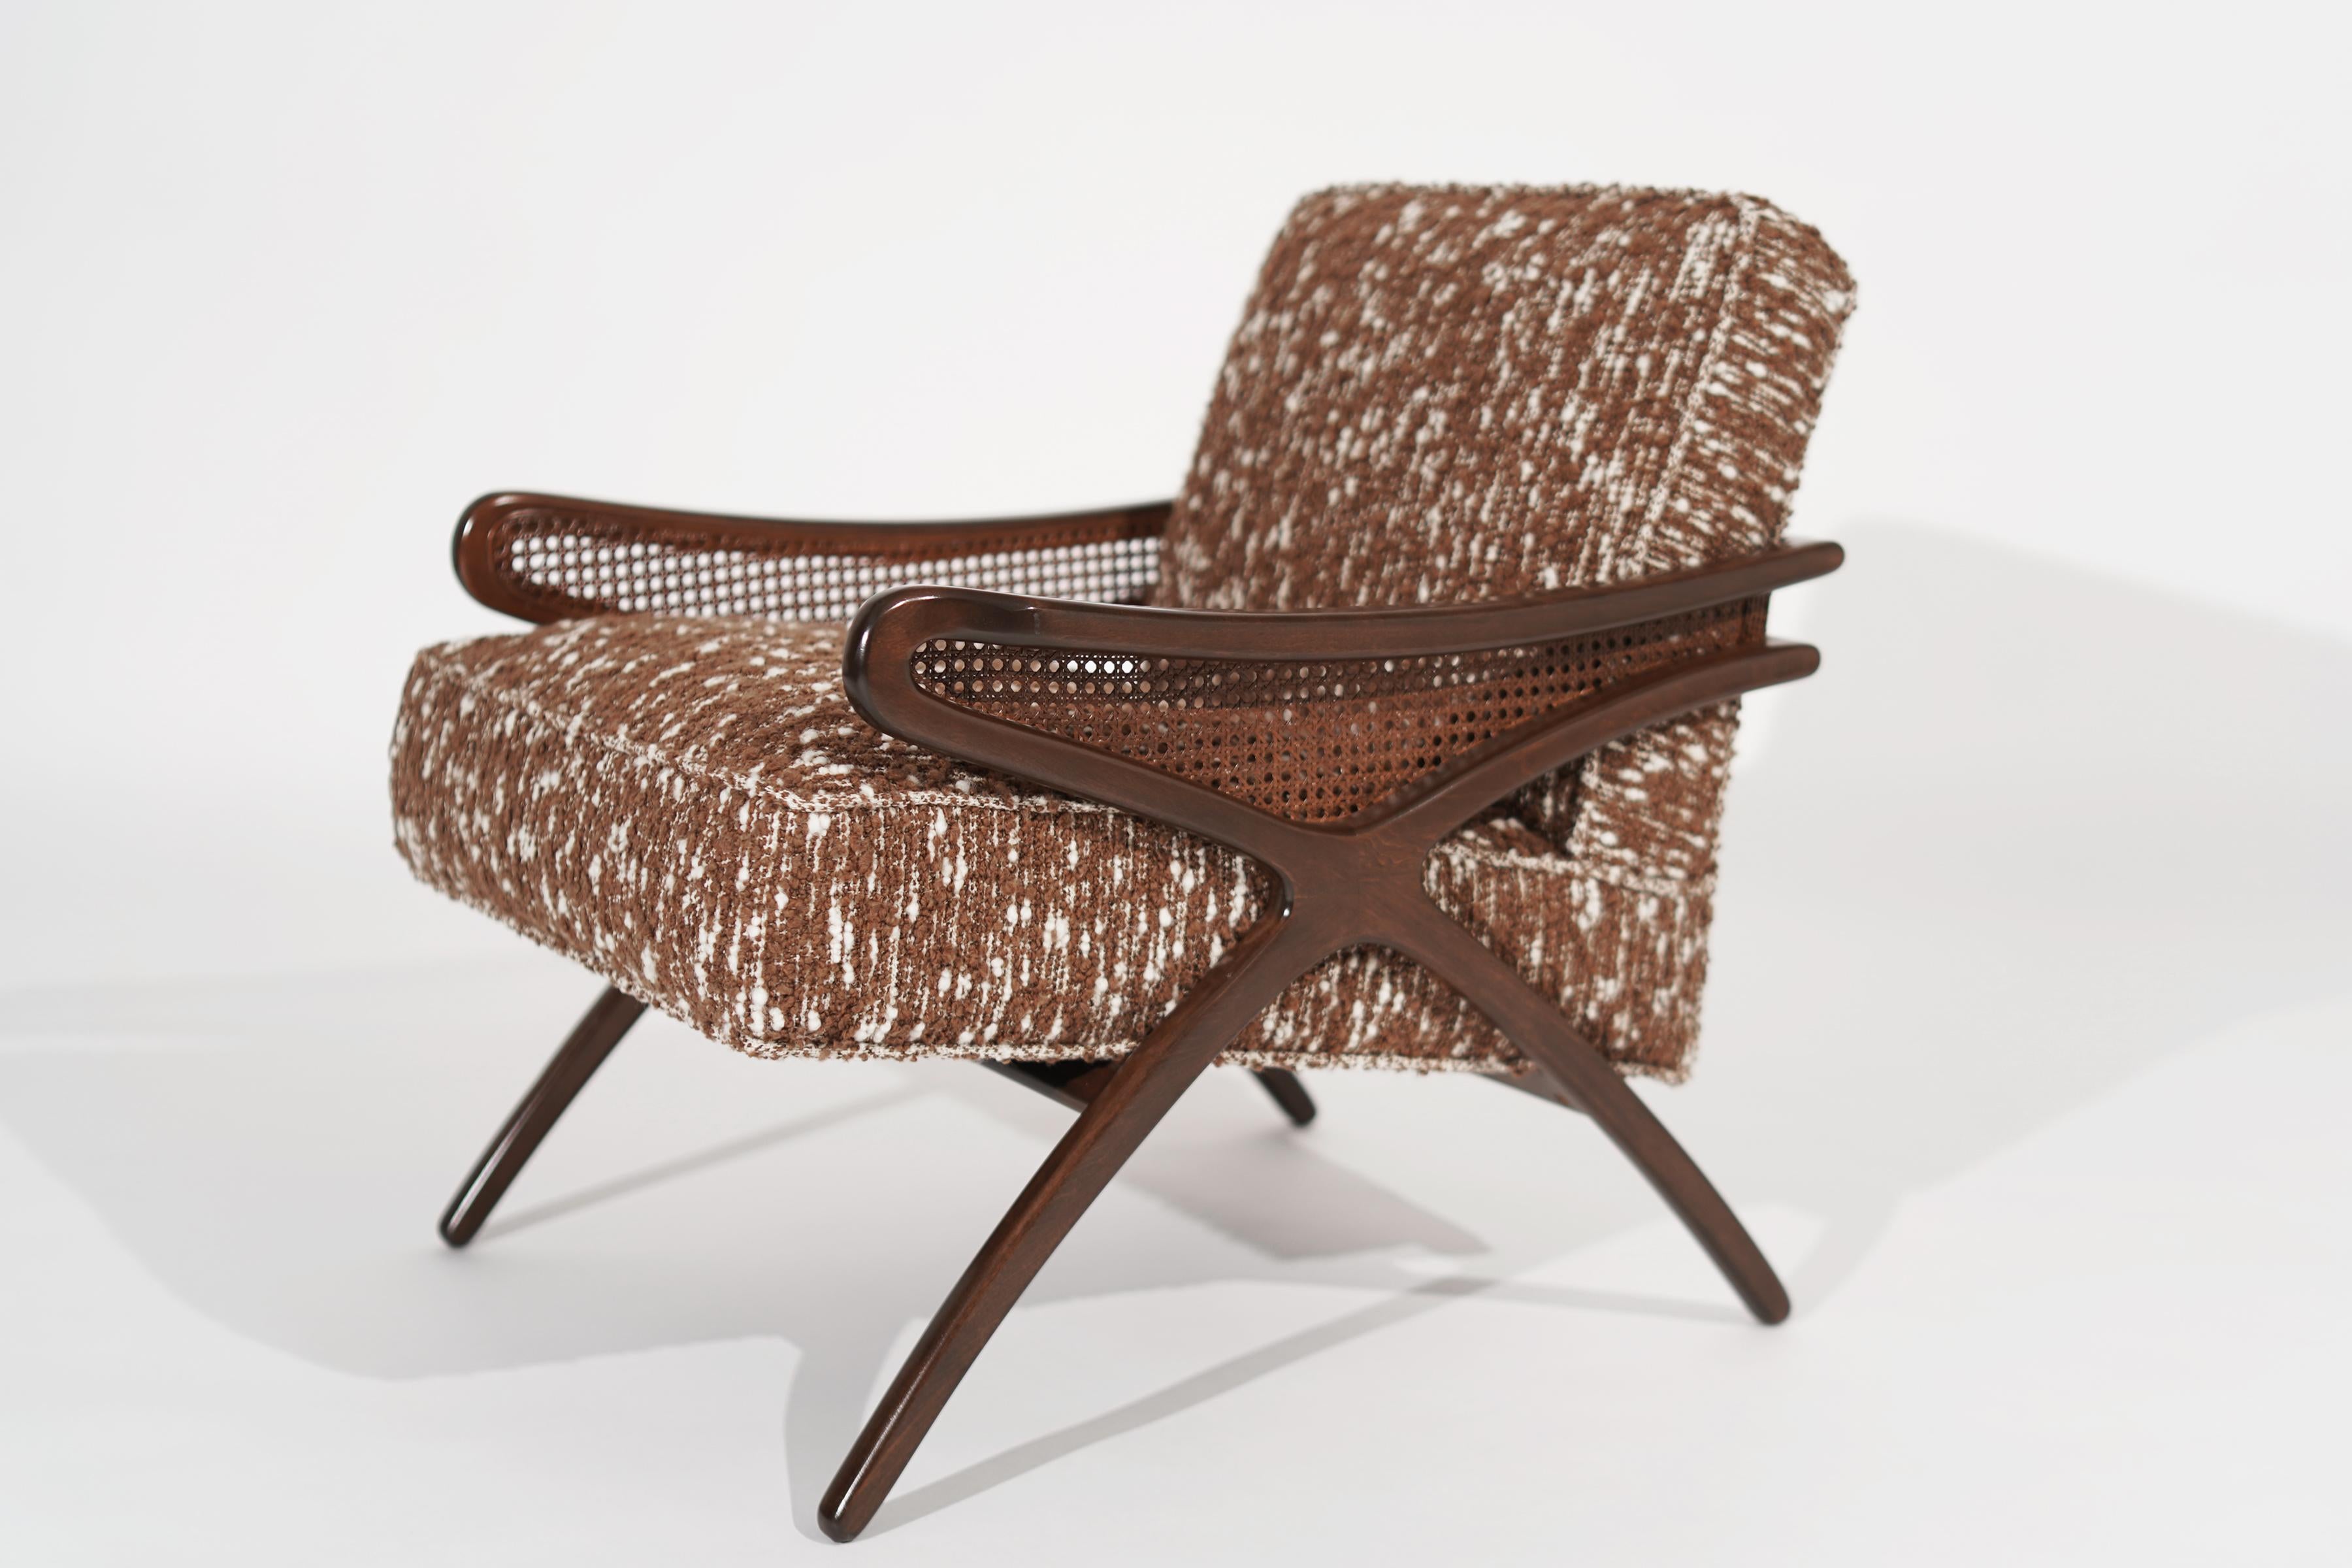 This lounge chair features a sculptural walnut framework with caning details. Reupholstered in a shaggy brown and beige wool. Very comfortable and perfect for a library or bedroom setting.

Other designers from this period include Paul McCobb,